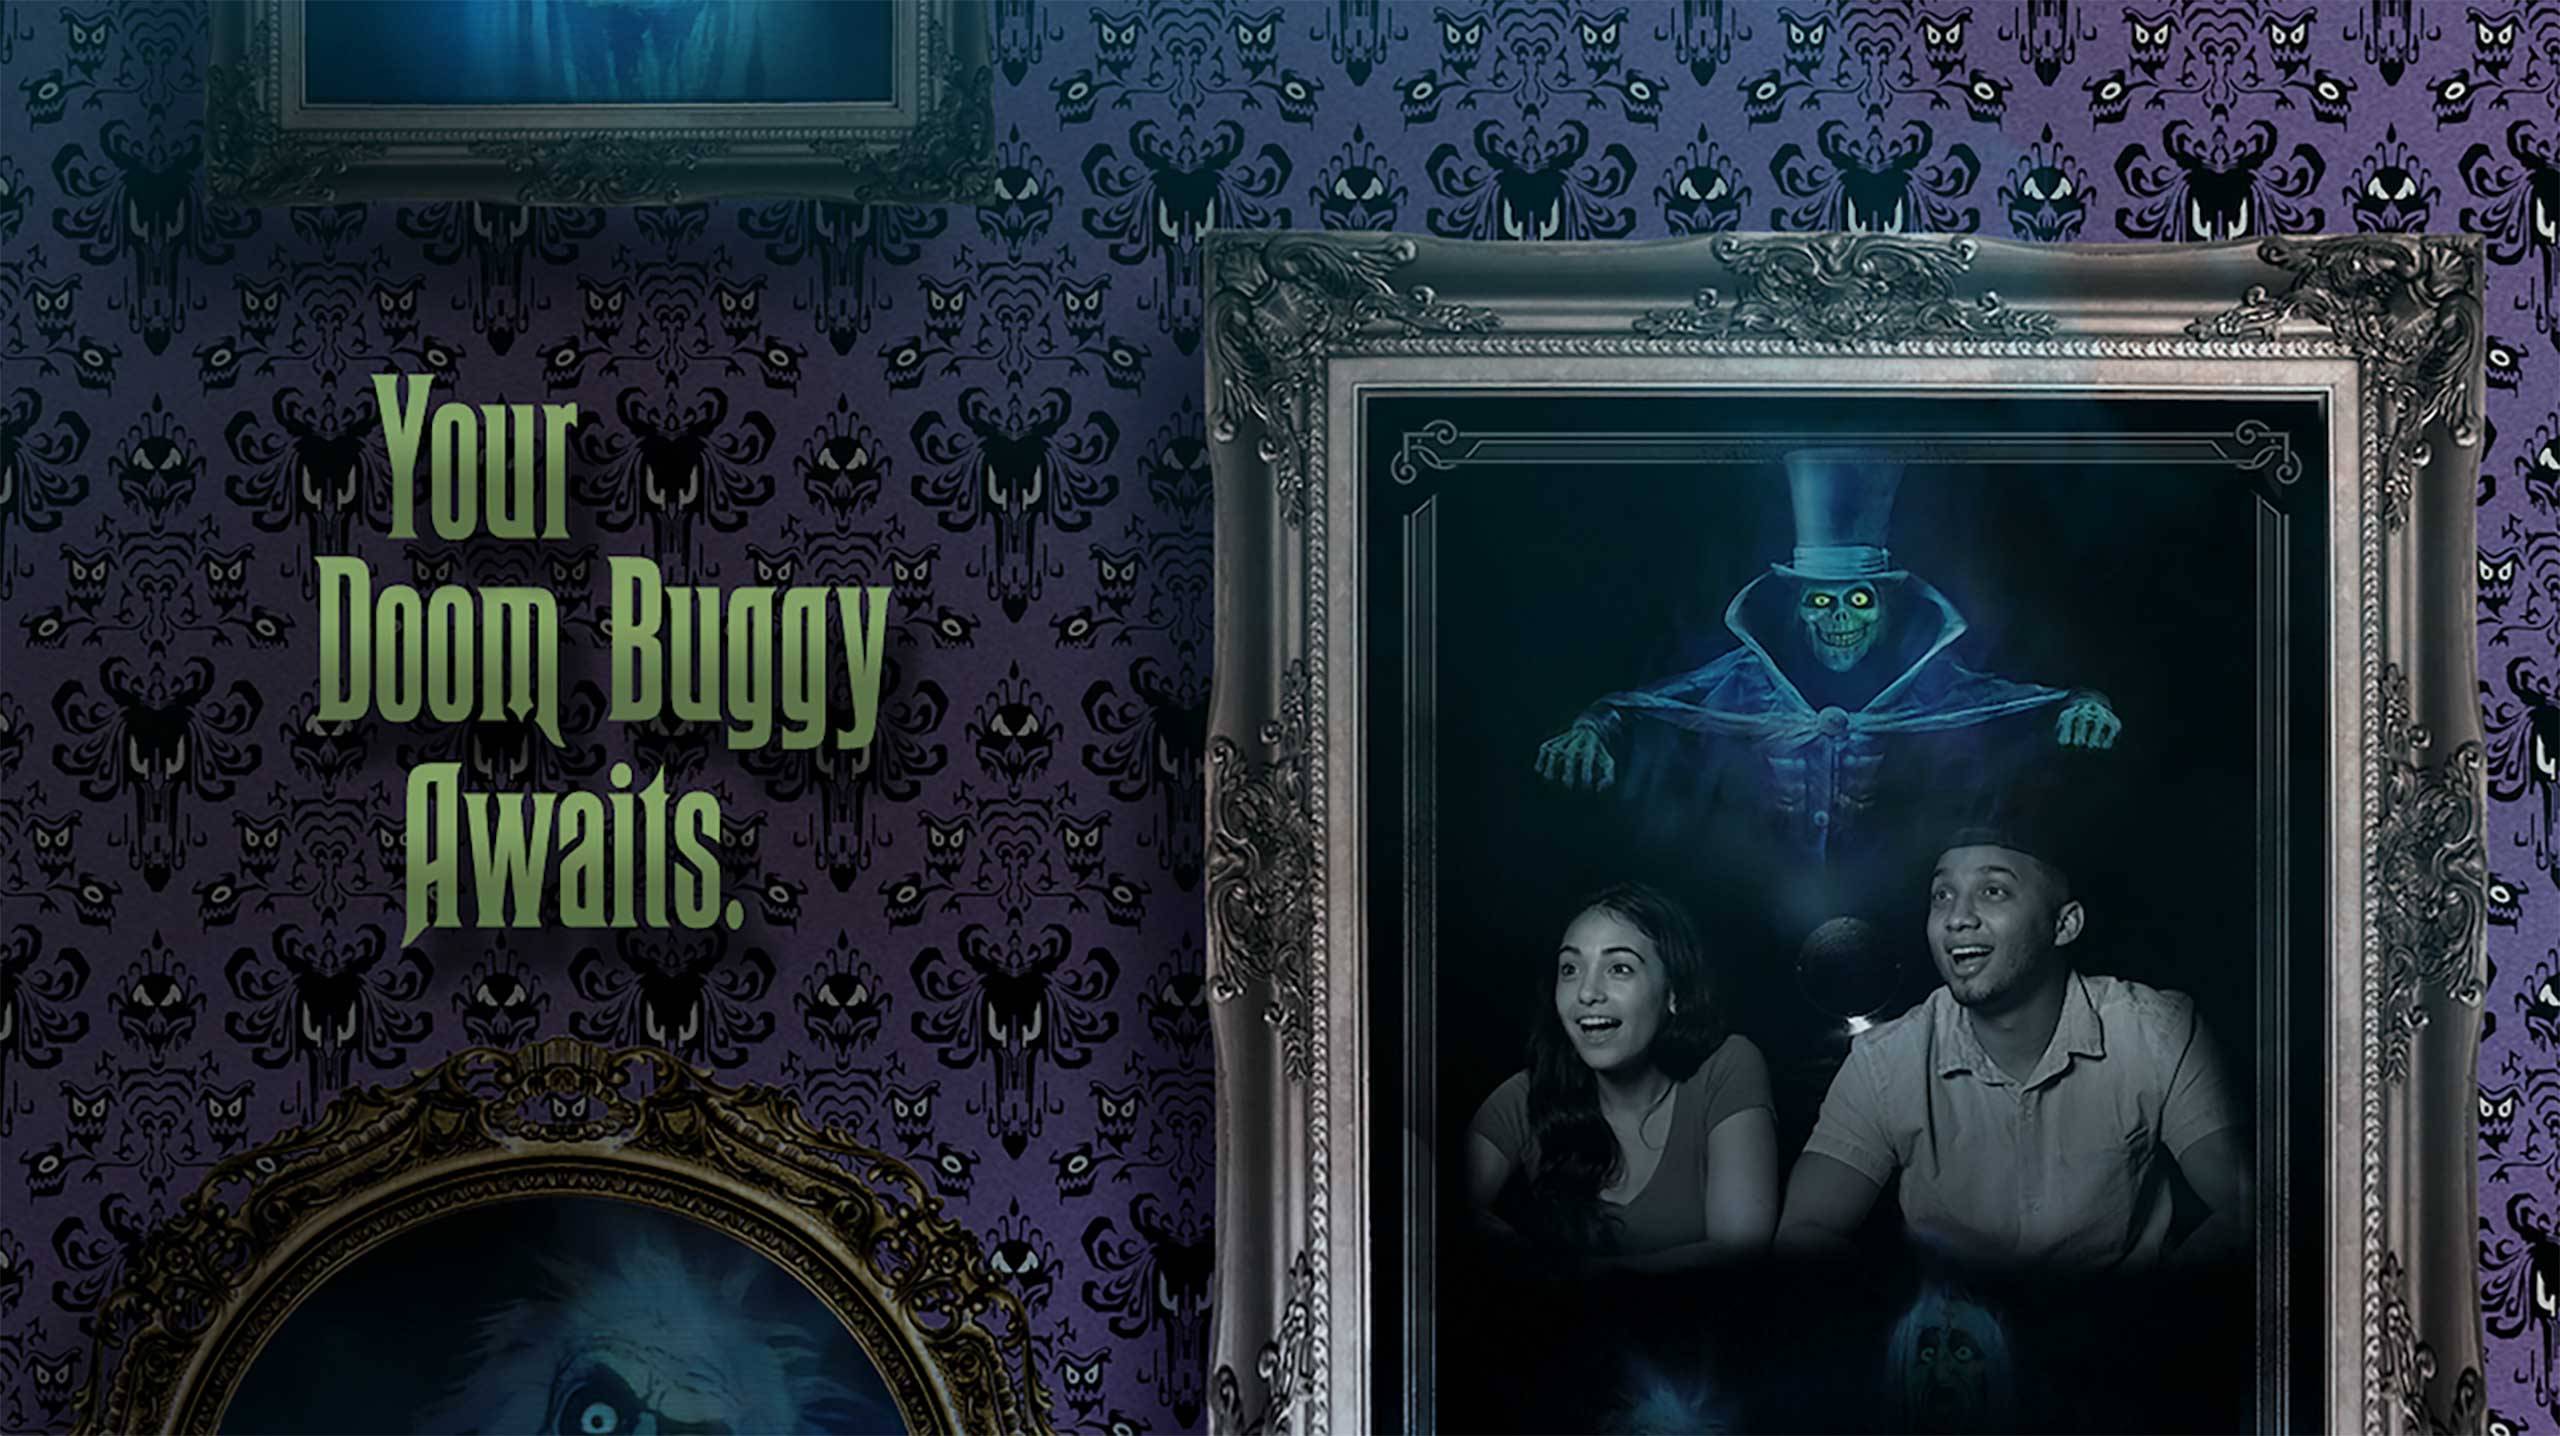 On-ride PhotoPass comes to the Haunted Mansion